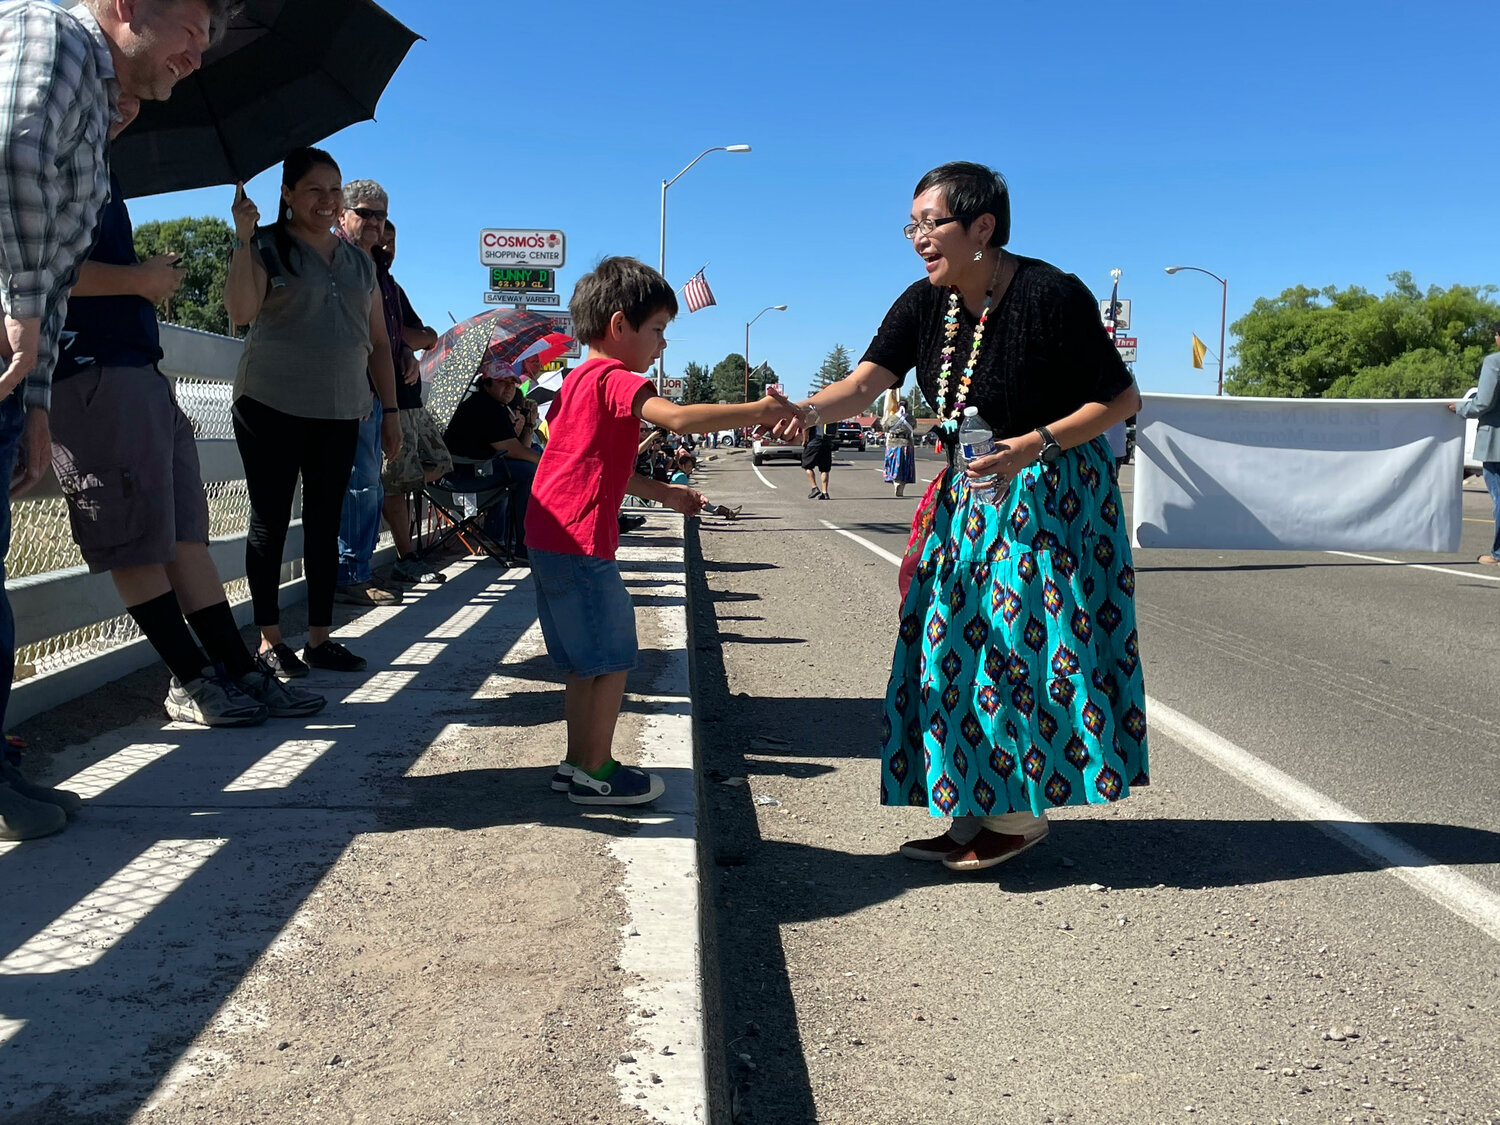 Navajo Nation Vice President Richelle Montoya, a native of Torreon, served as Grand Marshal of the 2023 Sandoval County Fair. At one point she stopped to greet 5-year-old Ean Simpson, also of Torreon.